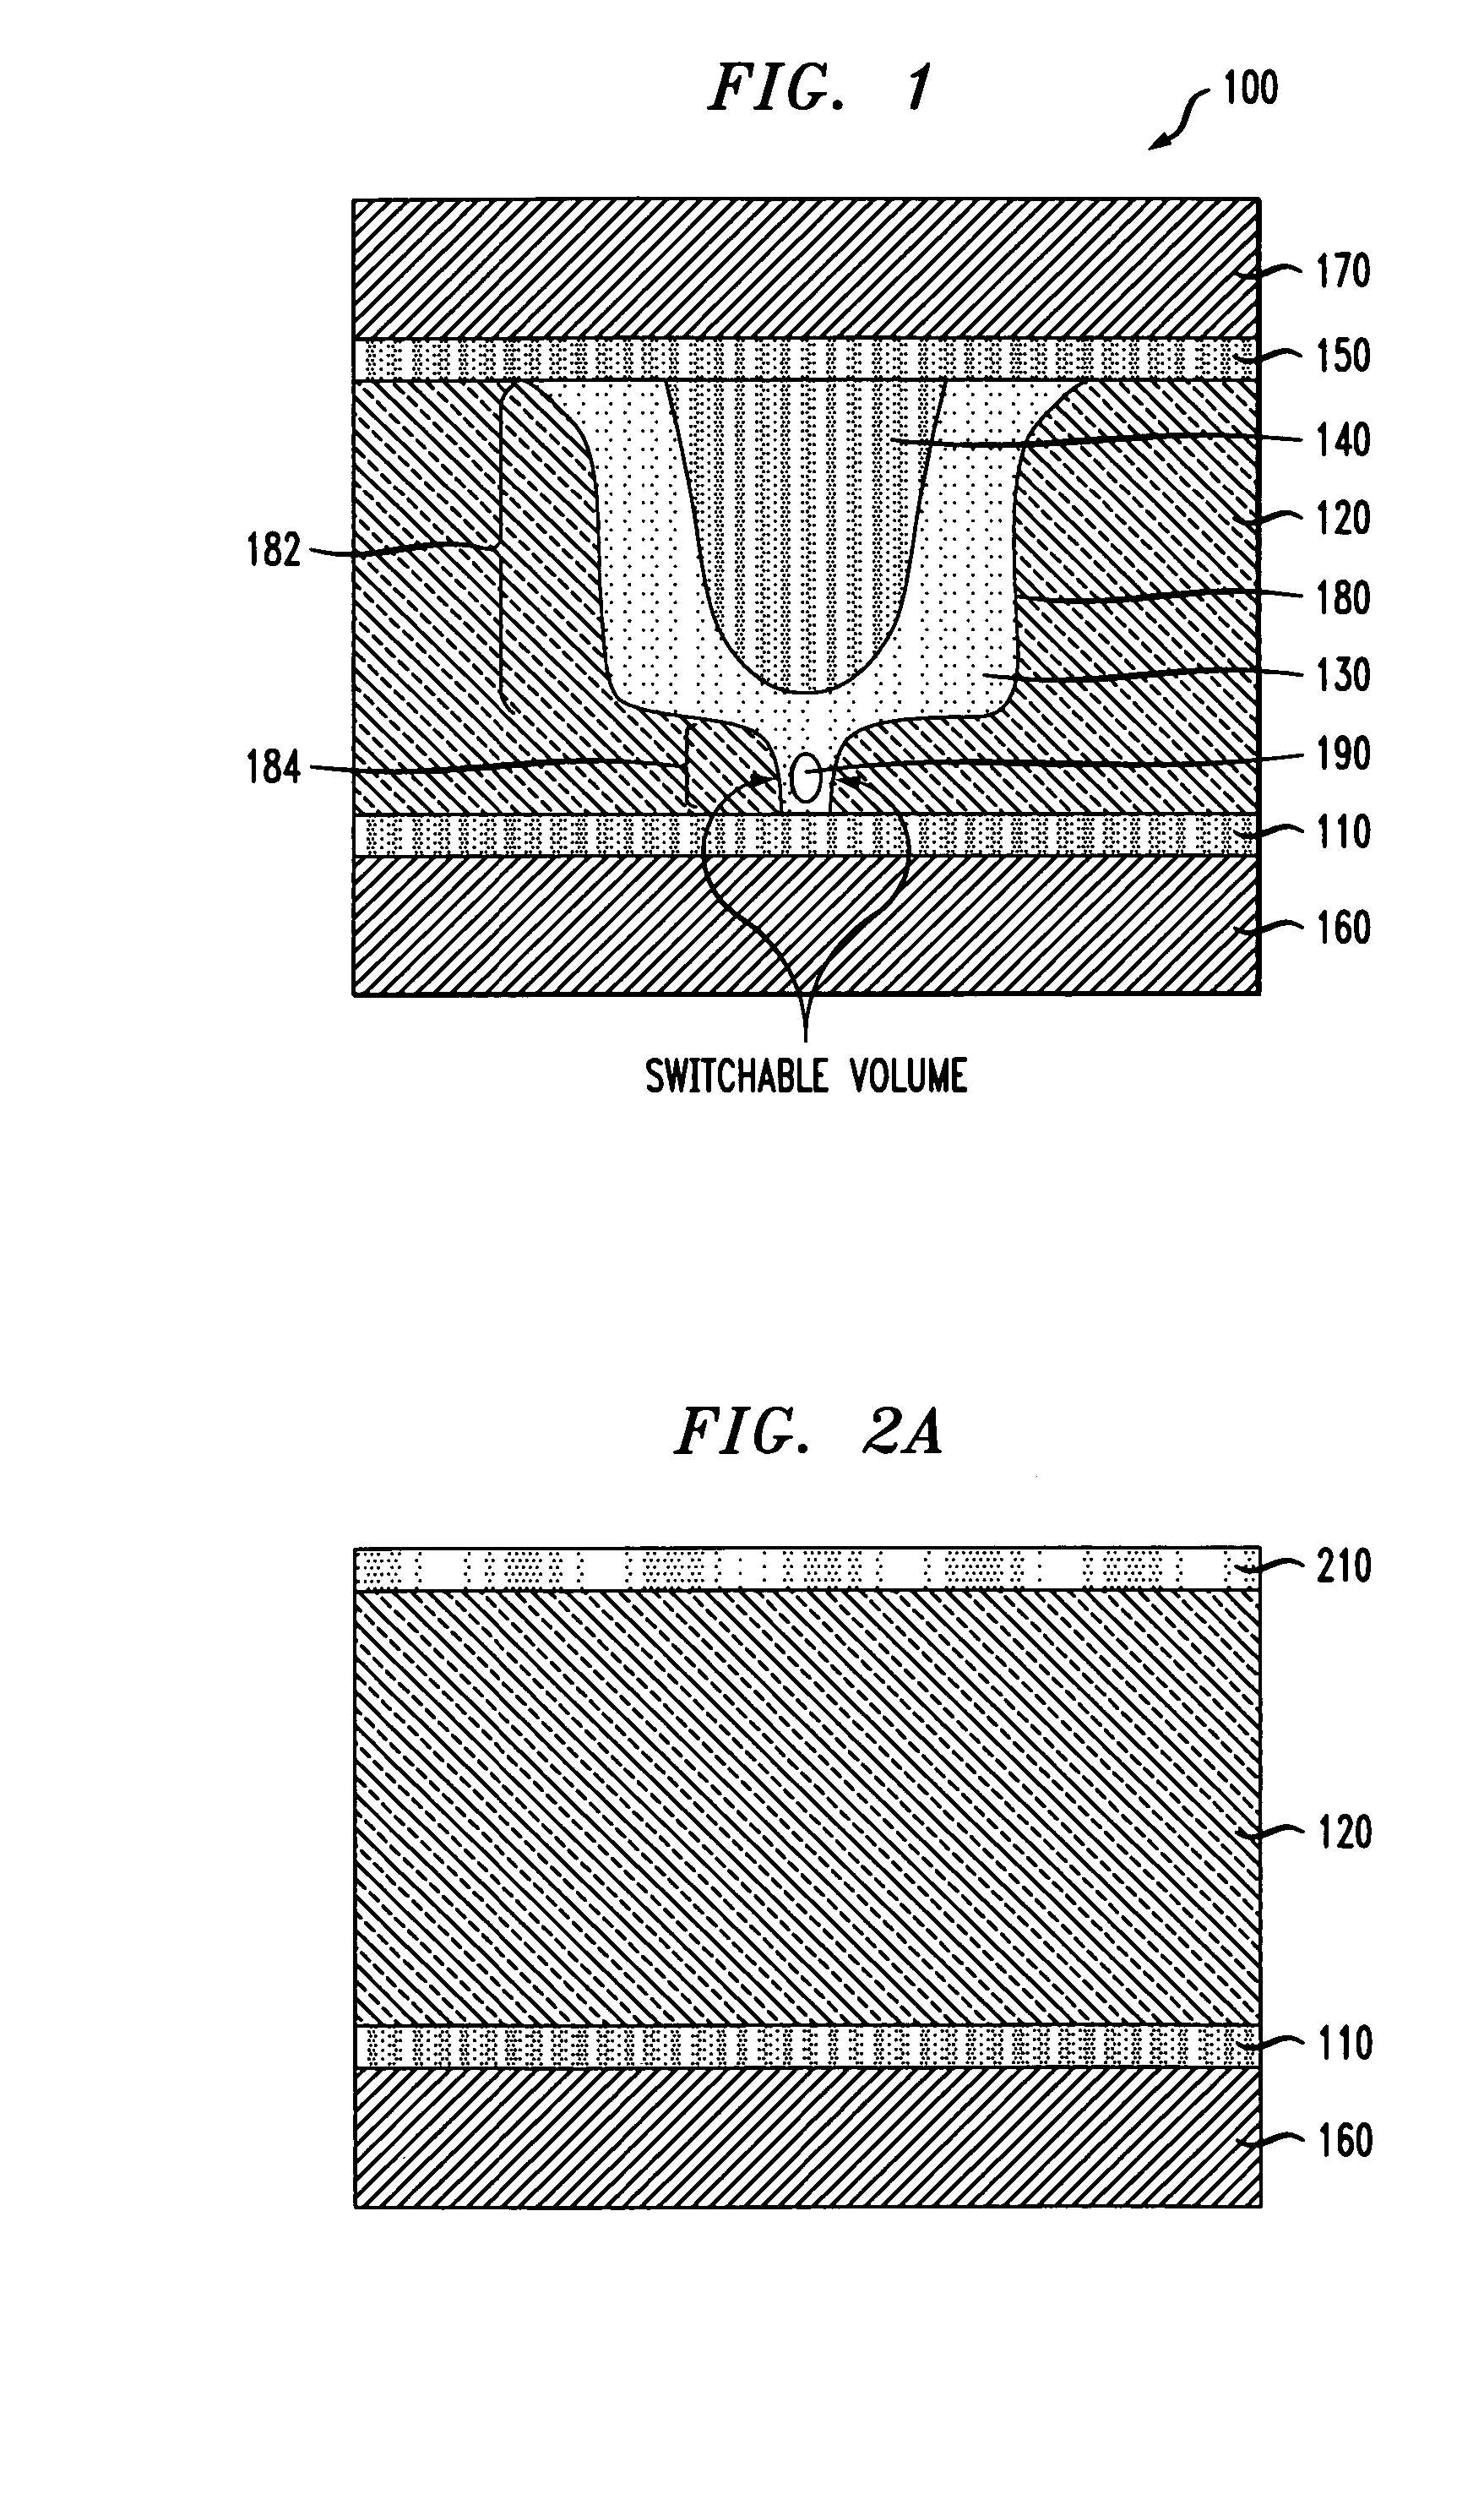 Phase change memory cell with limited switchable volume